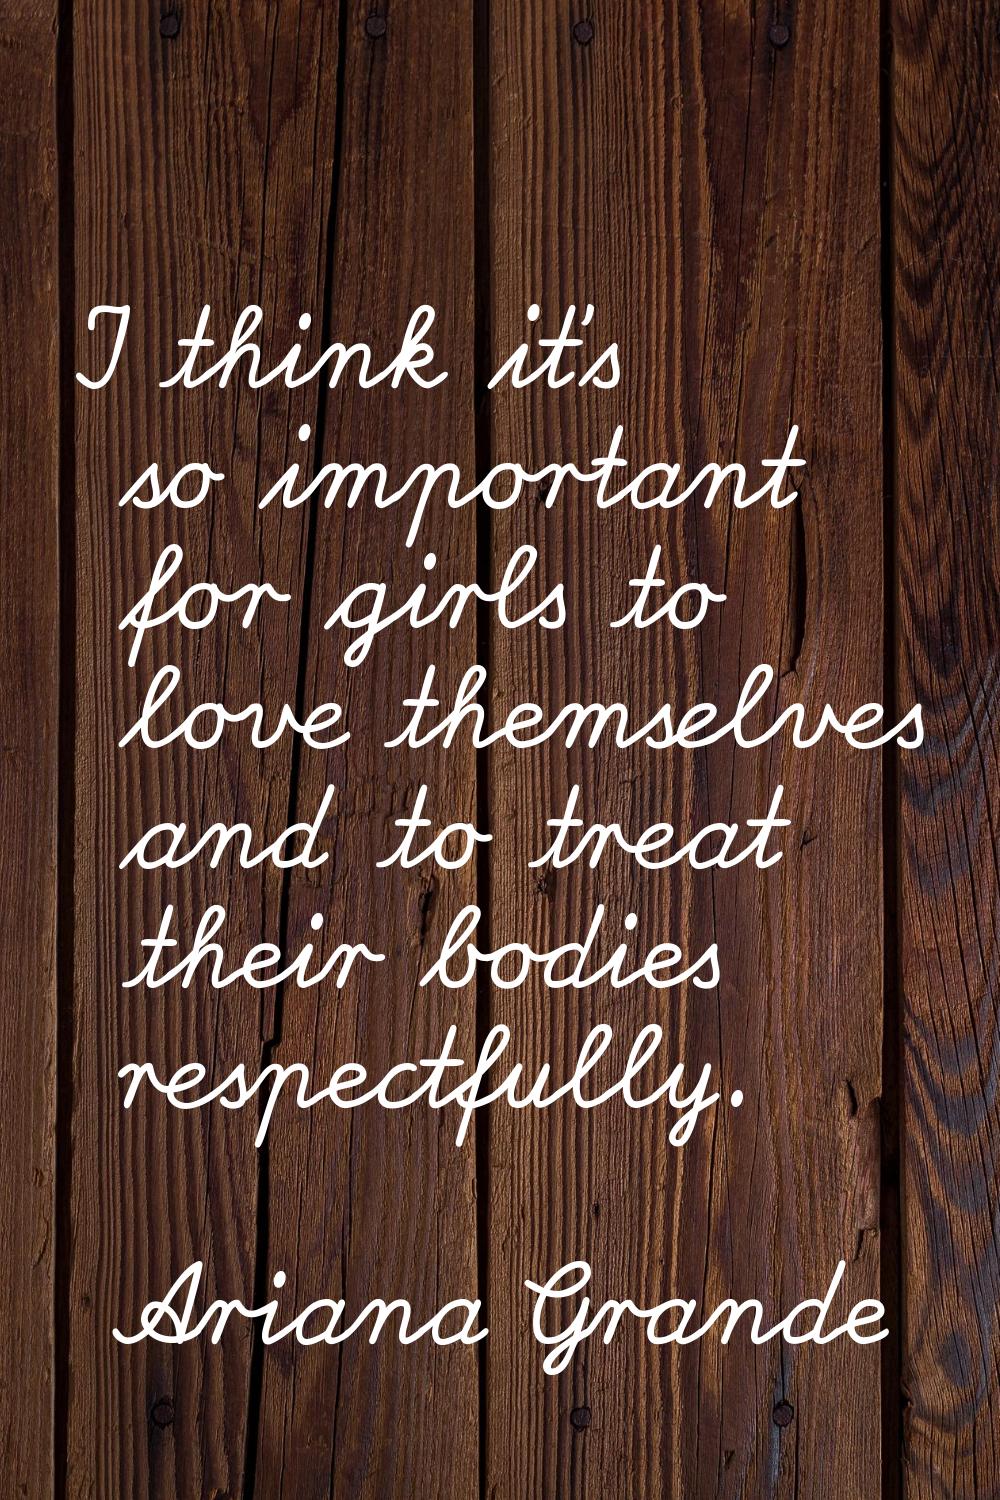 I think it's so important for girls to love themselves and to treat their bodies respectfully.